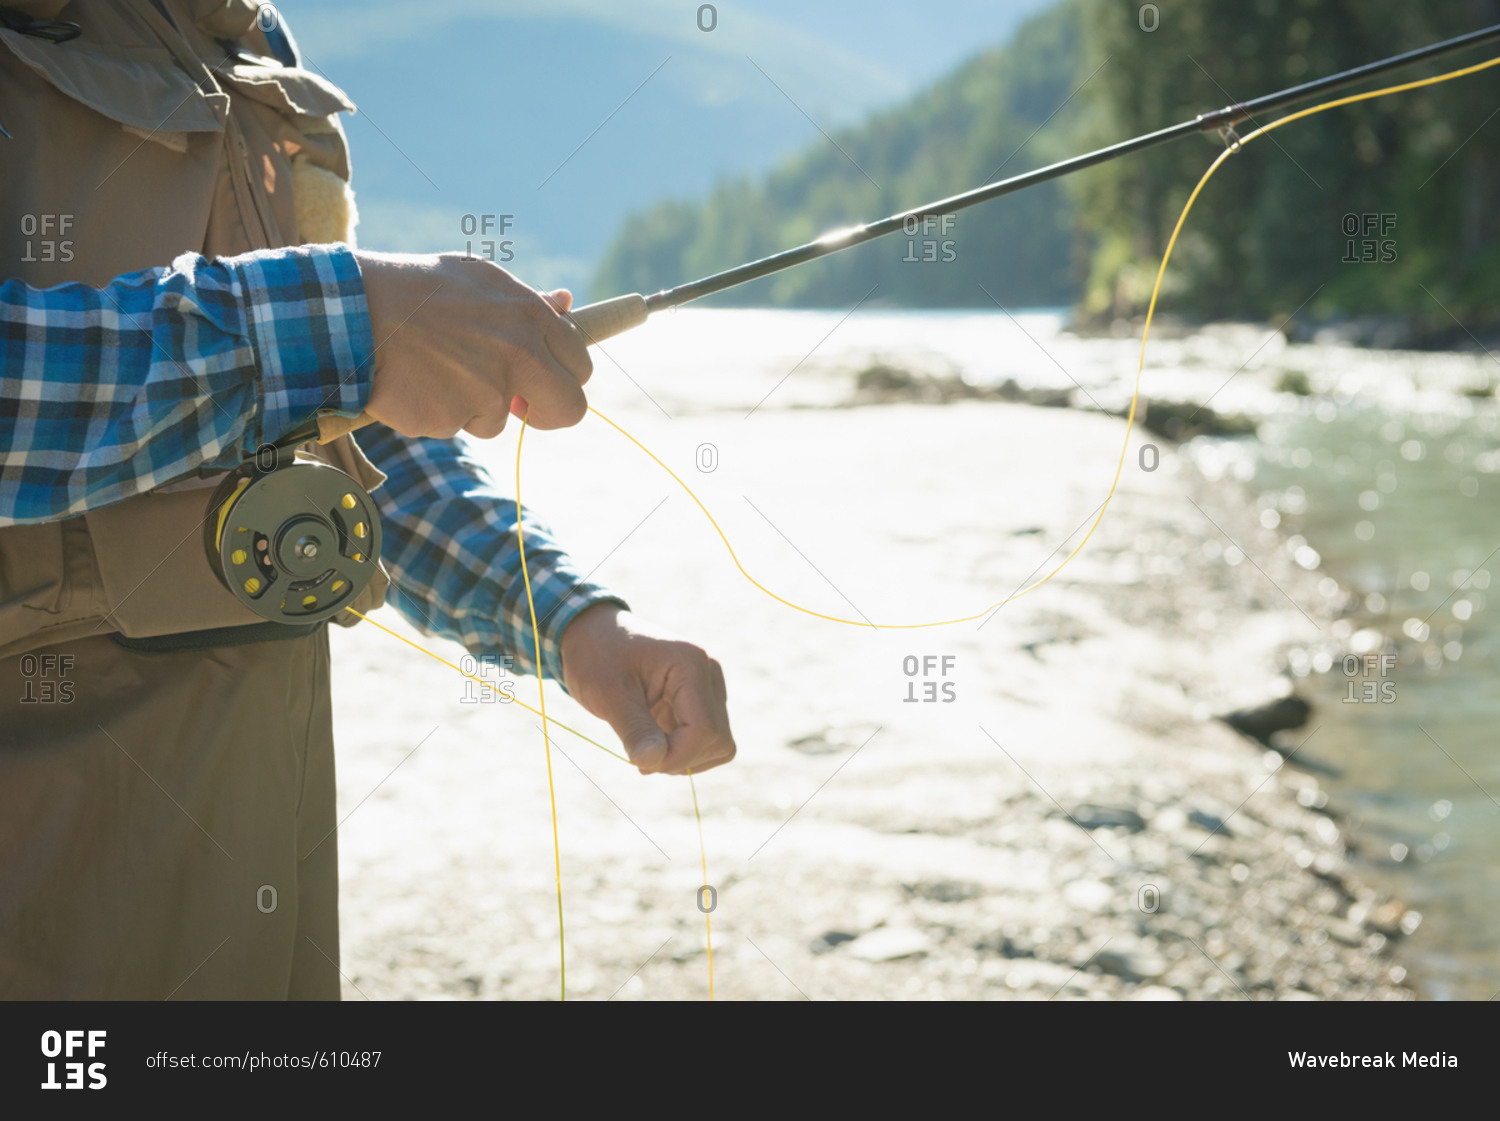 Mid section of man holding yellow thread while fishing in river against sky during sunny day